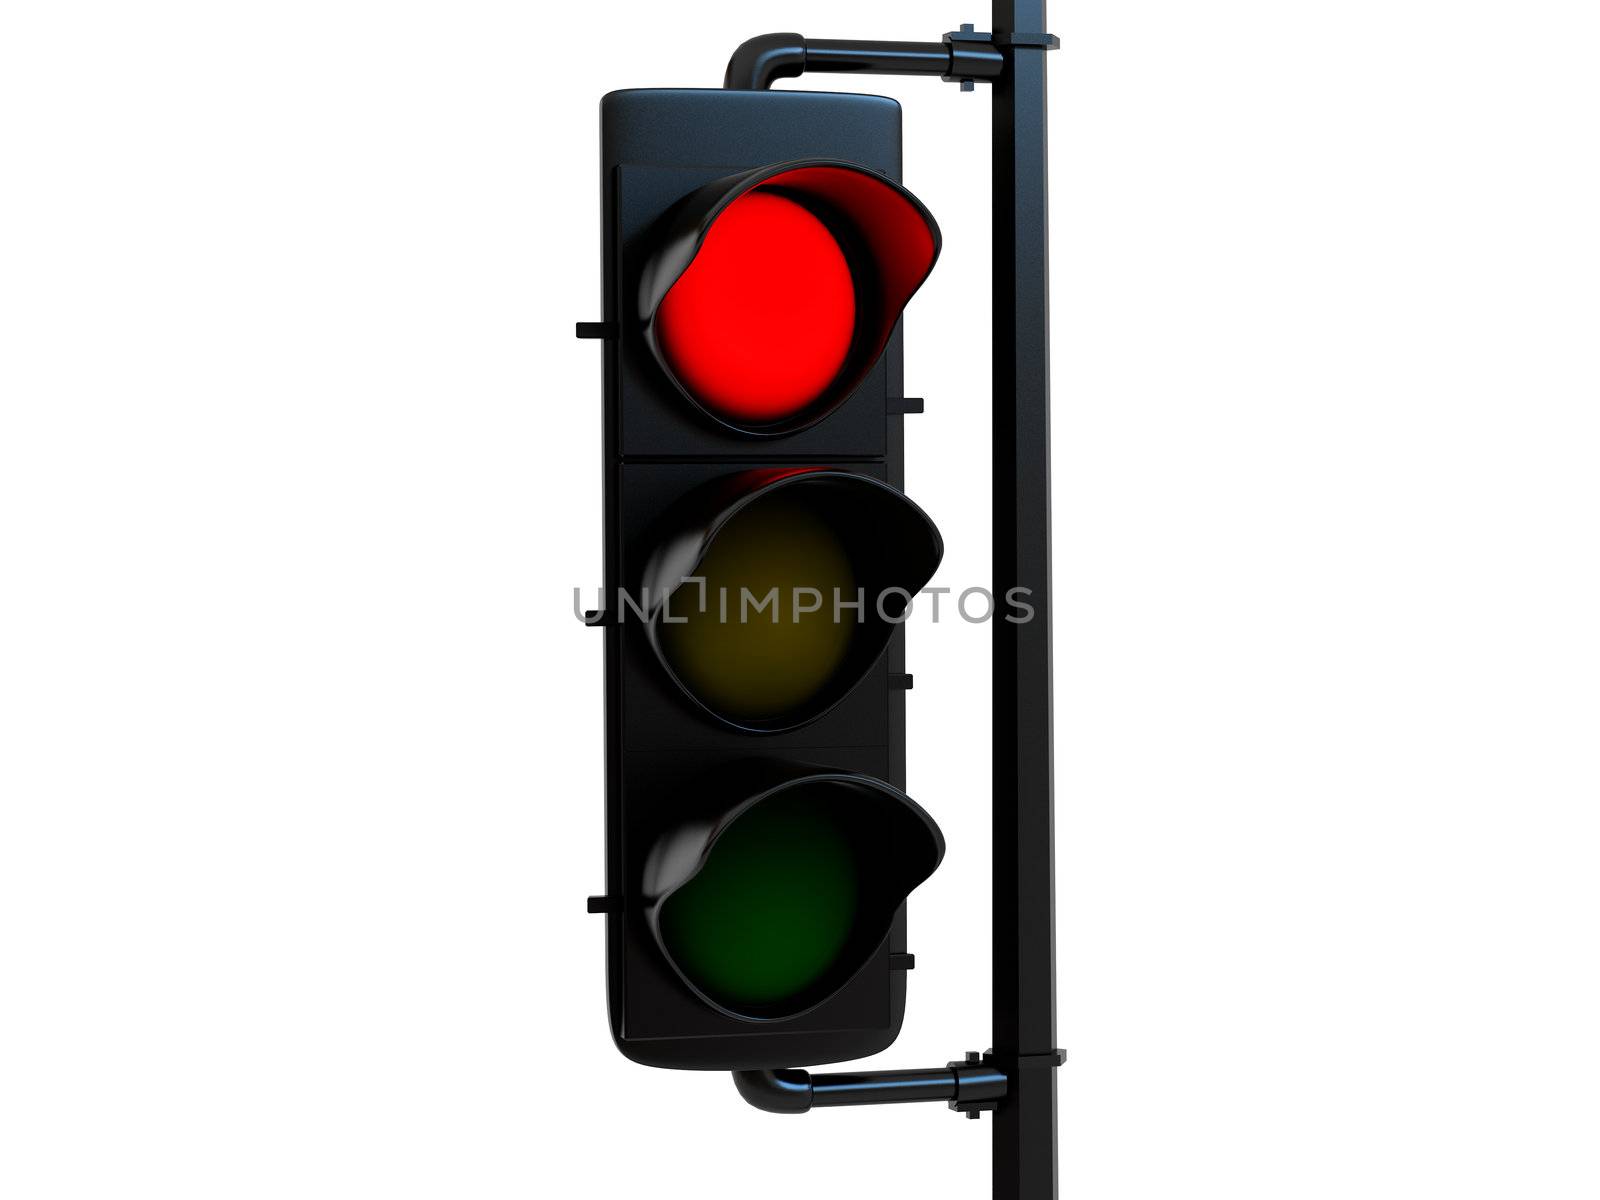 Traffic light with red light by rook